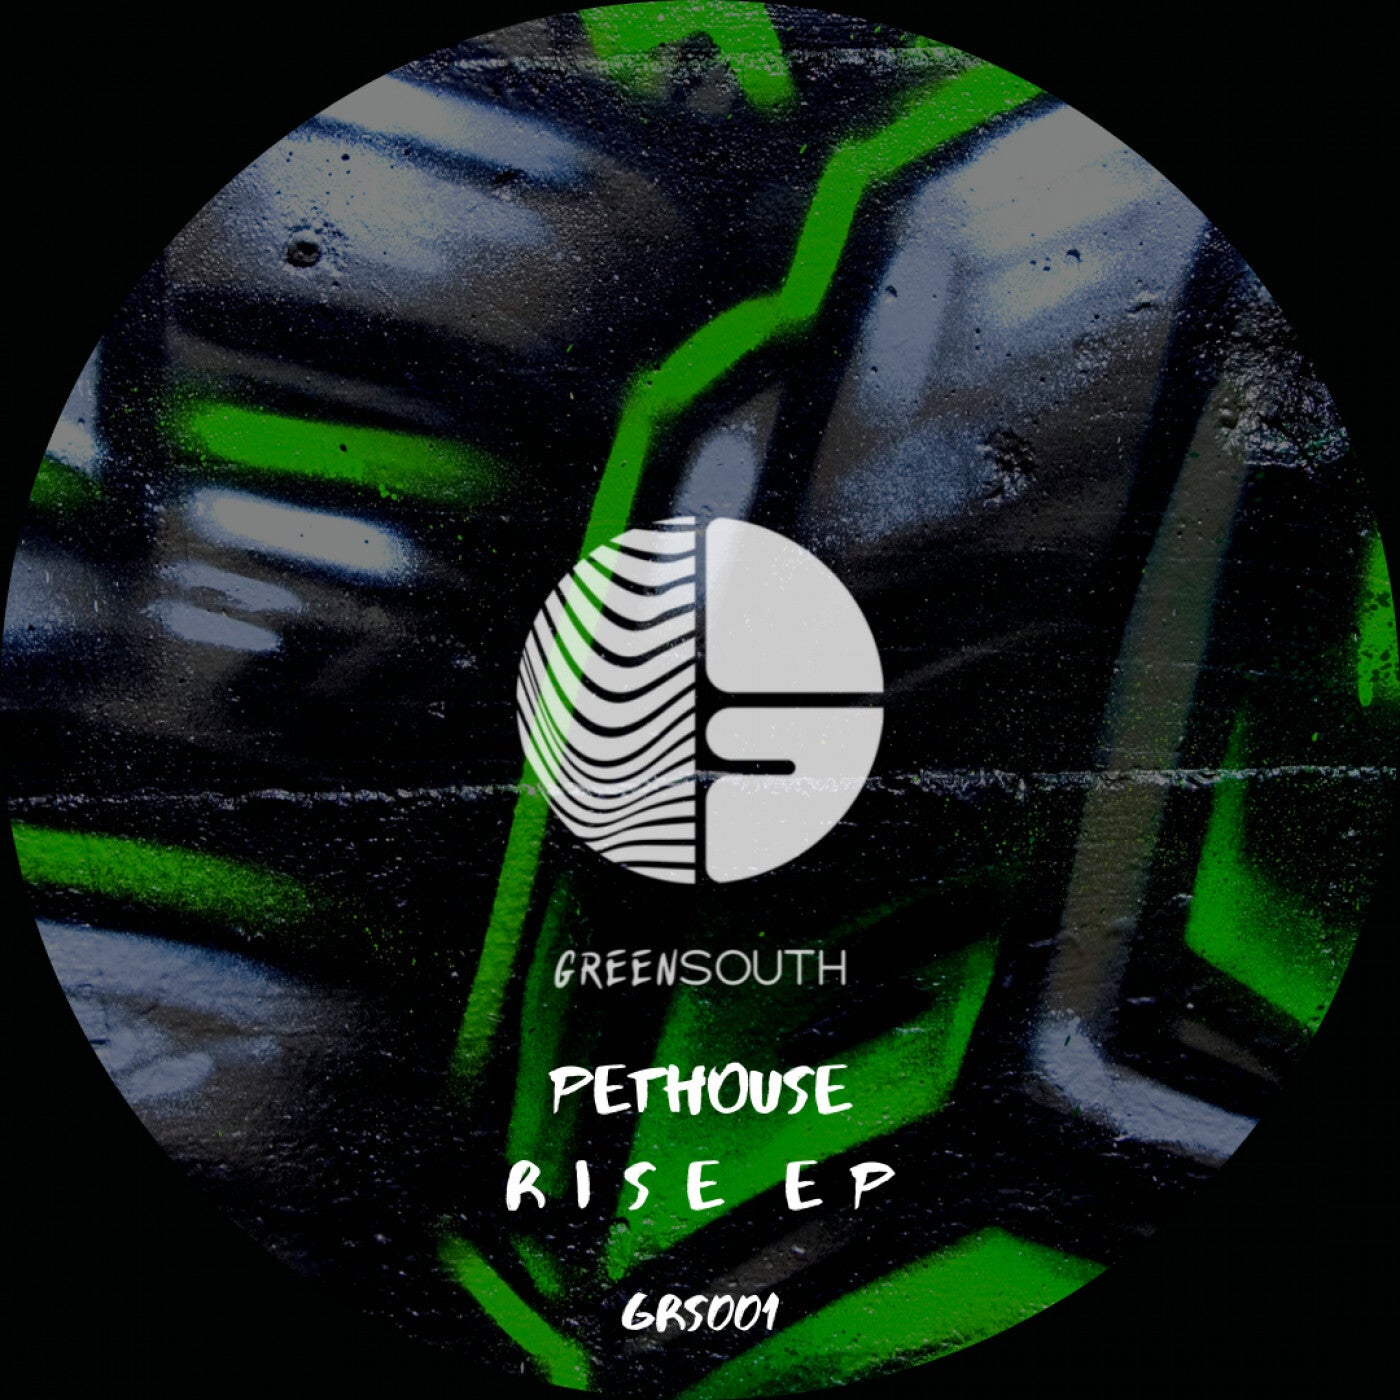 PETHOUSE – Rise EP [GRS001]